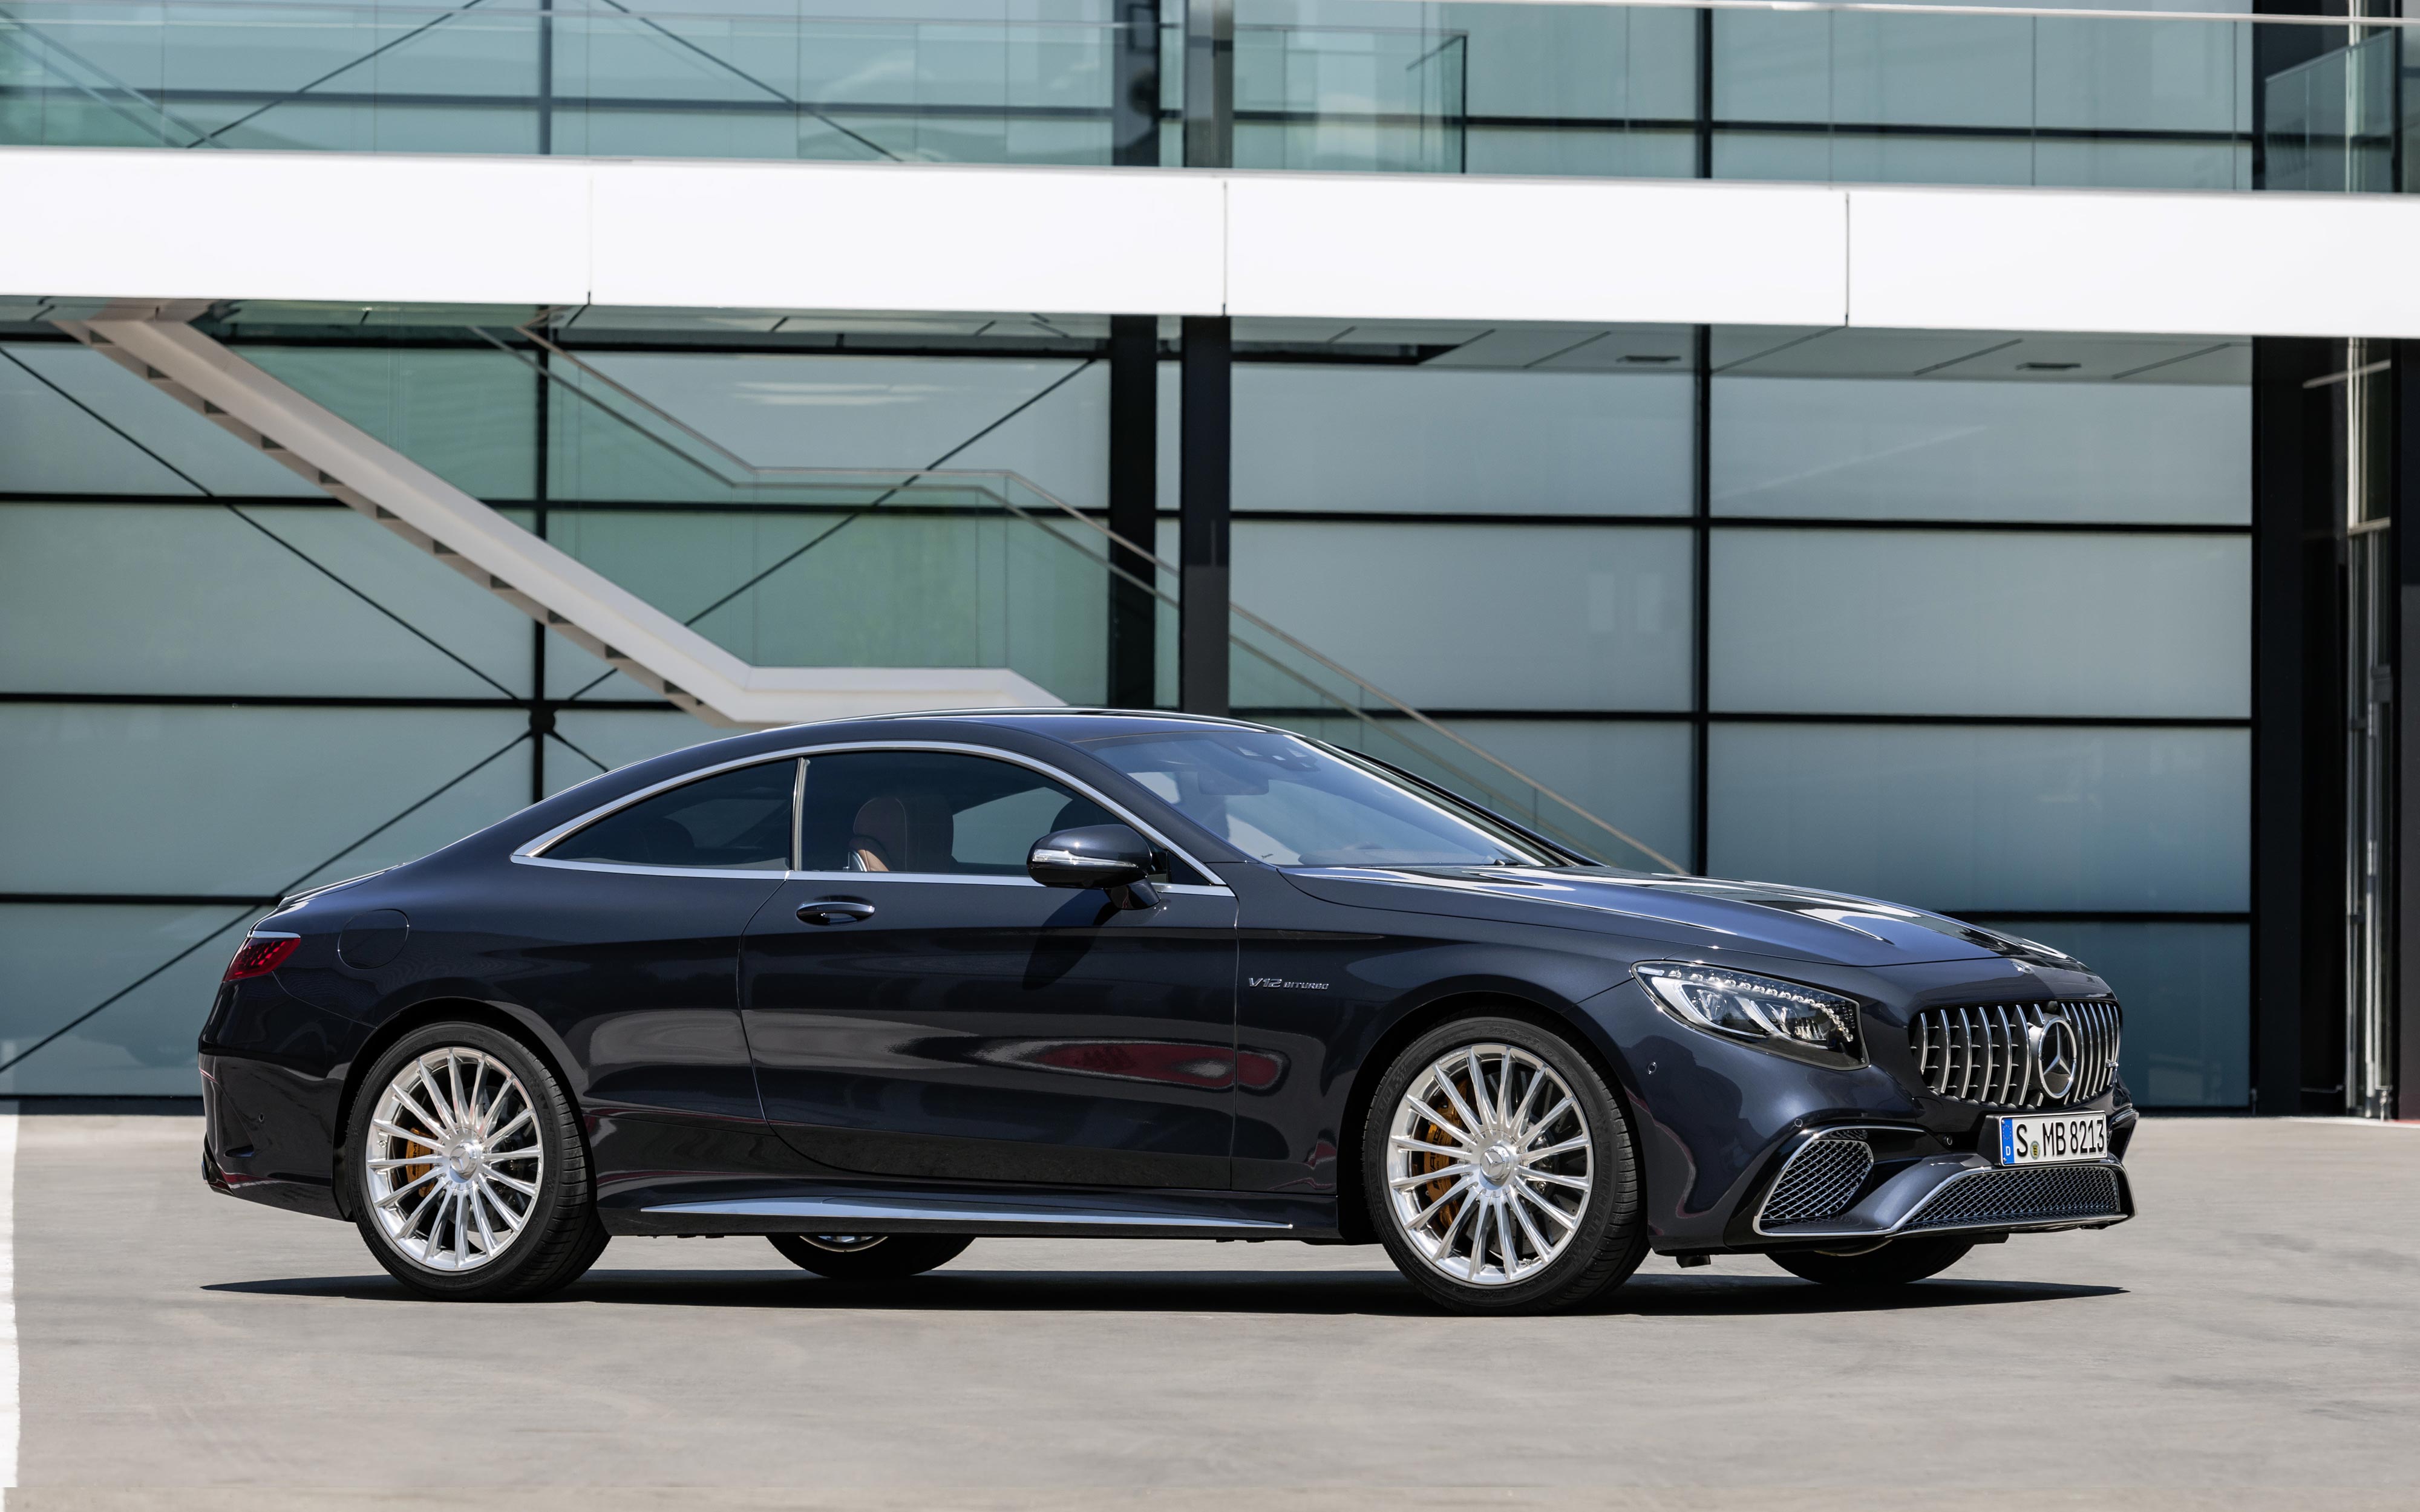  Mercedes S65 AMG Coupe 